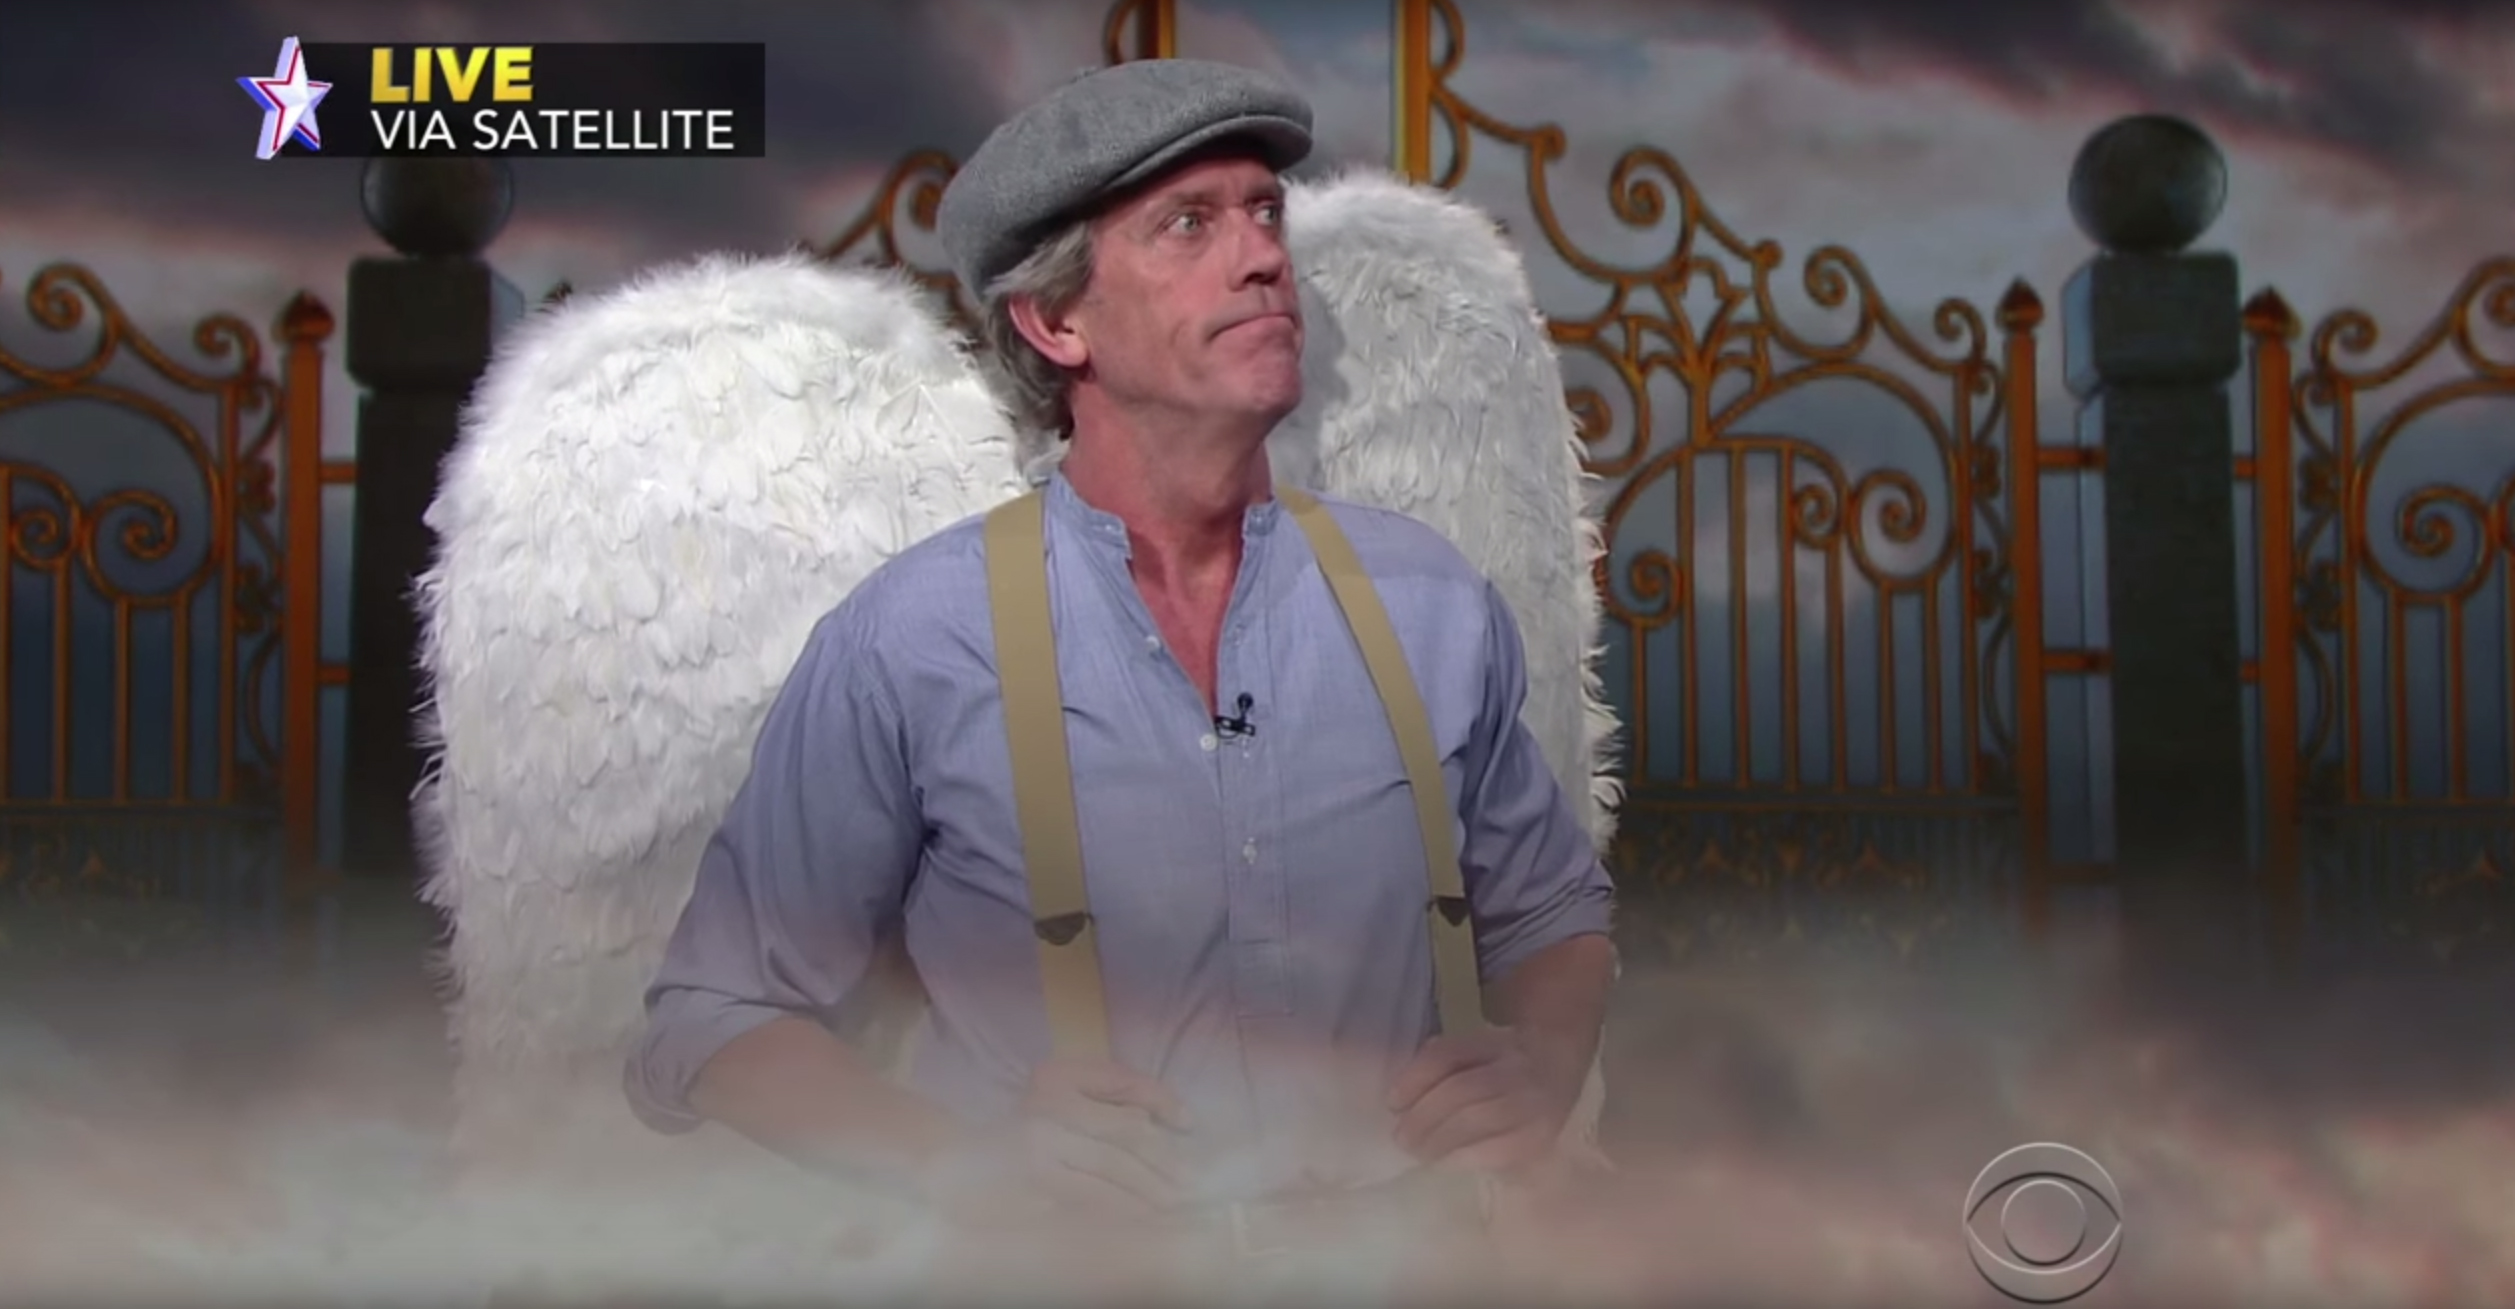 The Late Show with Stephen Colbert had a rather unusual guest on Wednesday night: a 'dead' voter called Horace McNulty